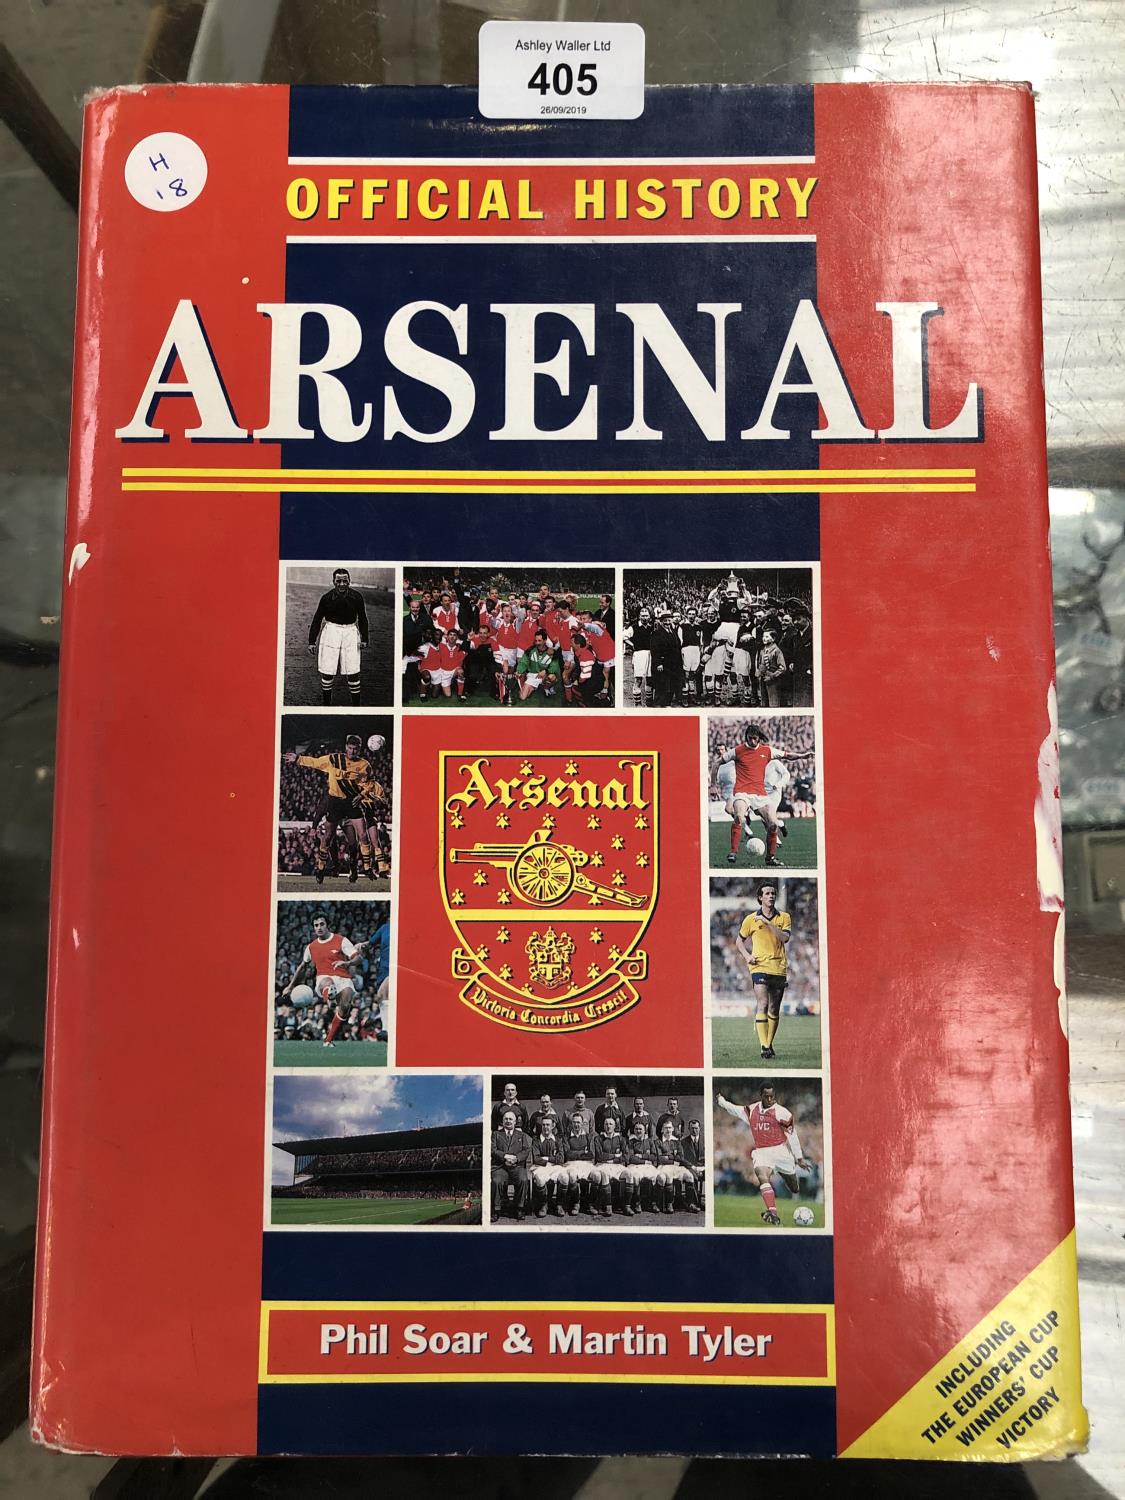 A 'THE OFFICIAL HISTORY OF ARSENAL' SIGNED BOOK - Image 2 of 3